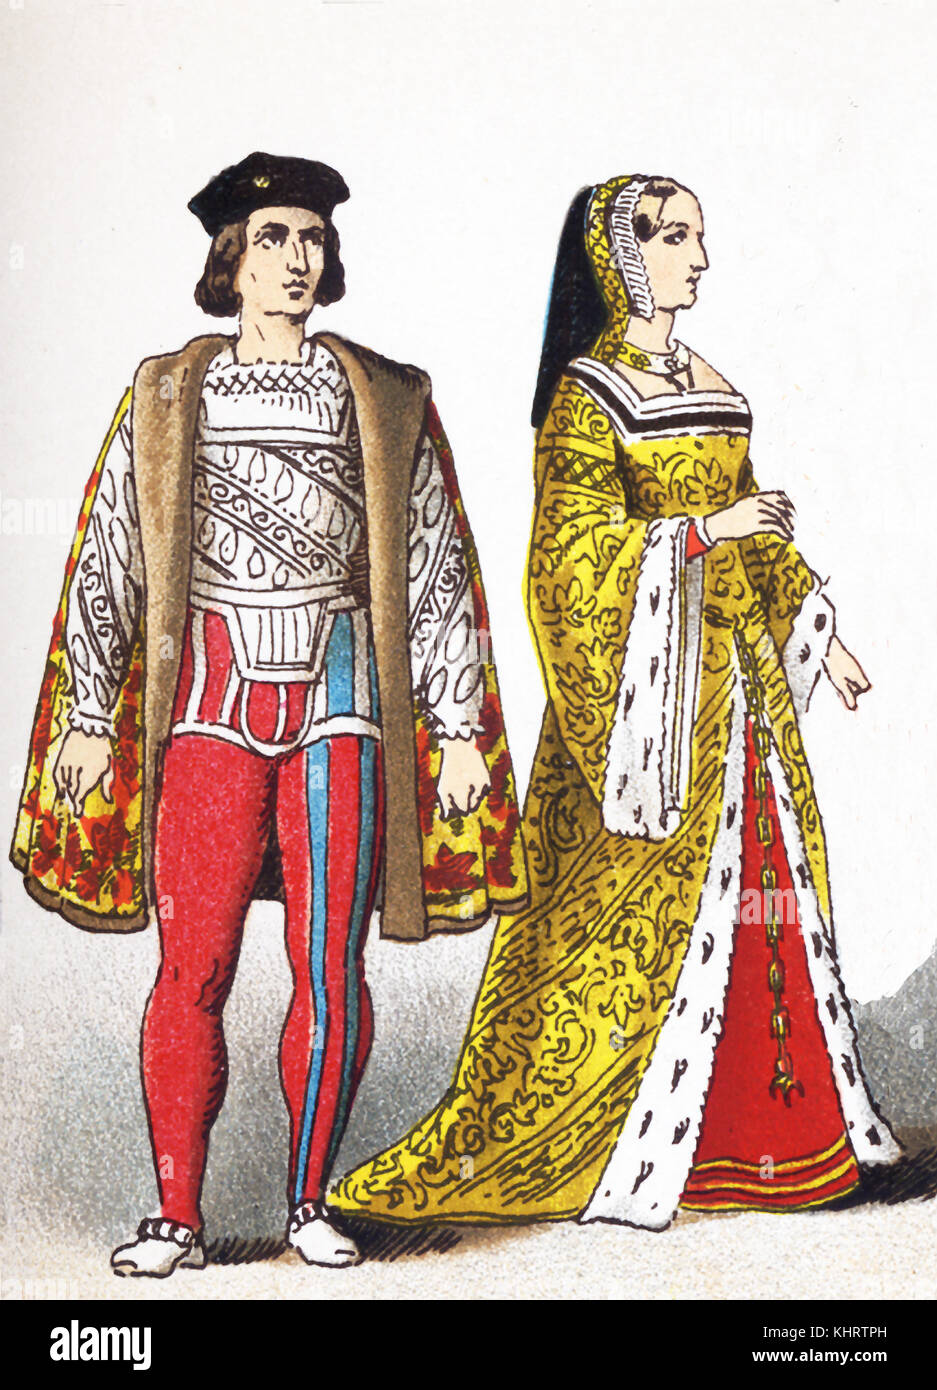 The figures represented here are Admiral d'Amboise and Anne of Britanny (died 1514). The French nobleman Admiral d’Amboise was a French commander in the War of the League of Cambrai. Anne of Brittany was Duchess of Brittany and Queen consort of France. She was married to Maximilian I (Holy Roman Emperor), and then to Charles VIII of France, and then to Louis XII of France.  This illustration dates to 1882. Stock Photo